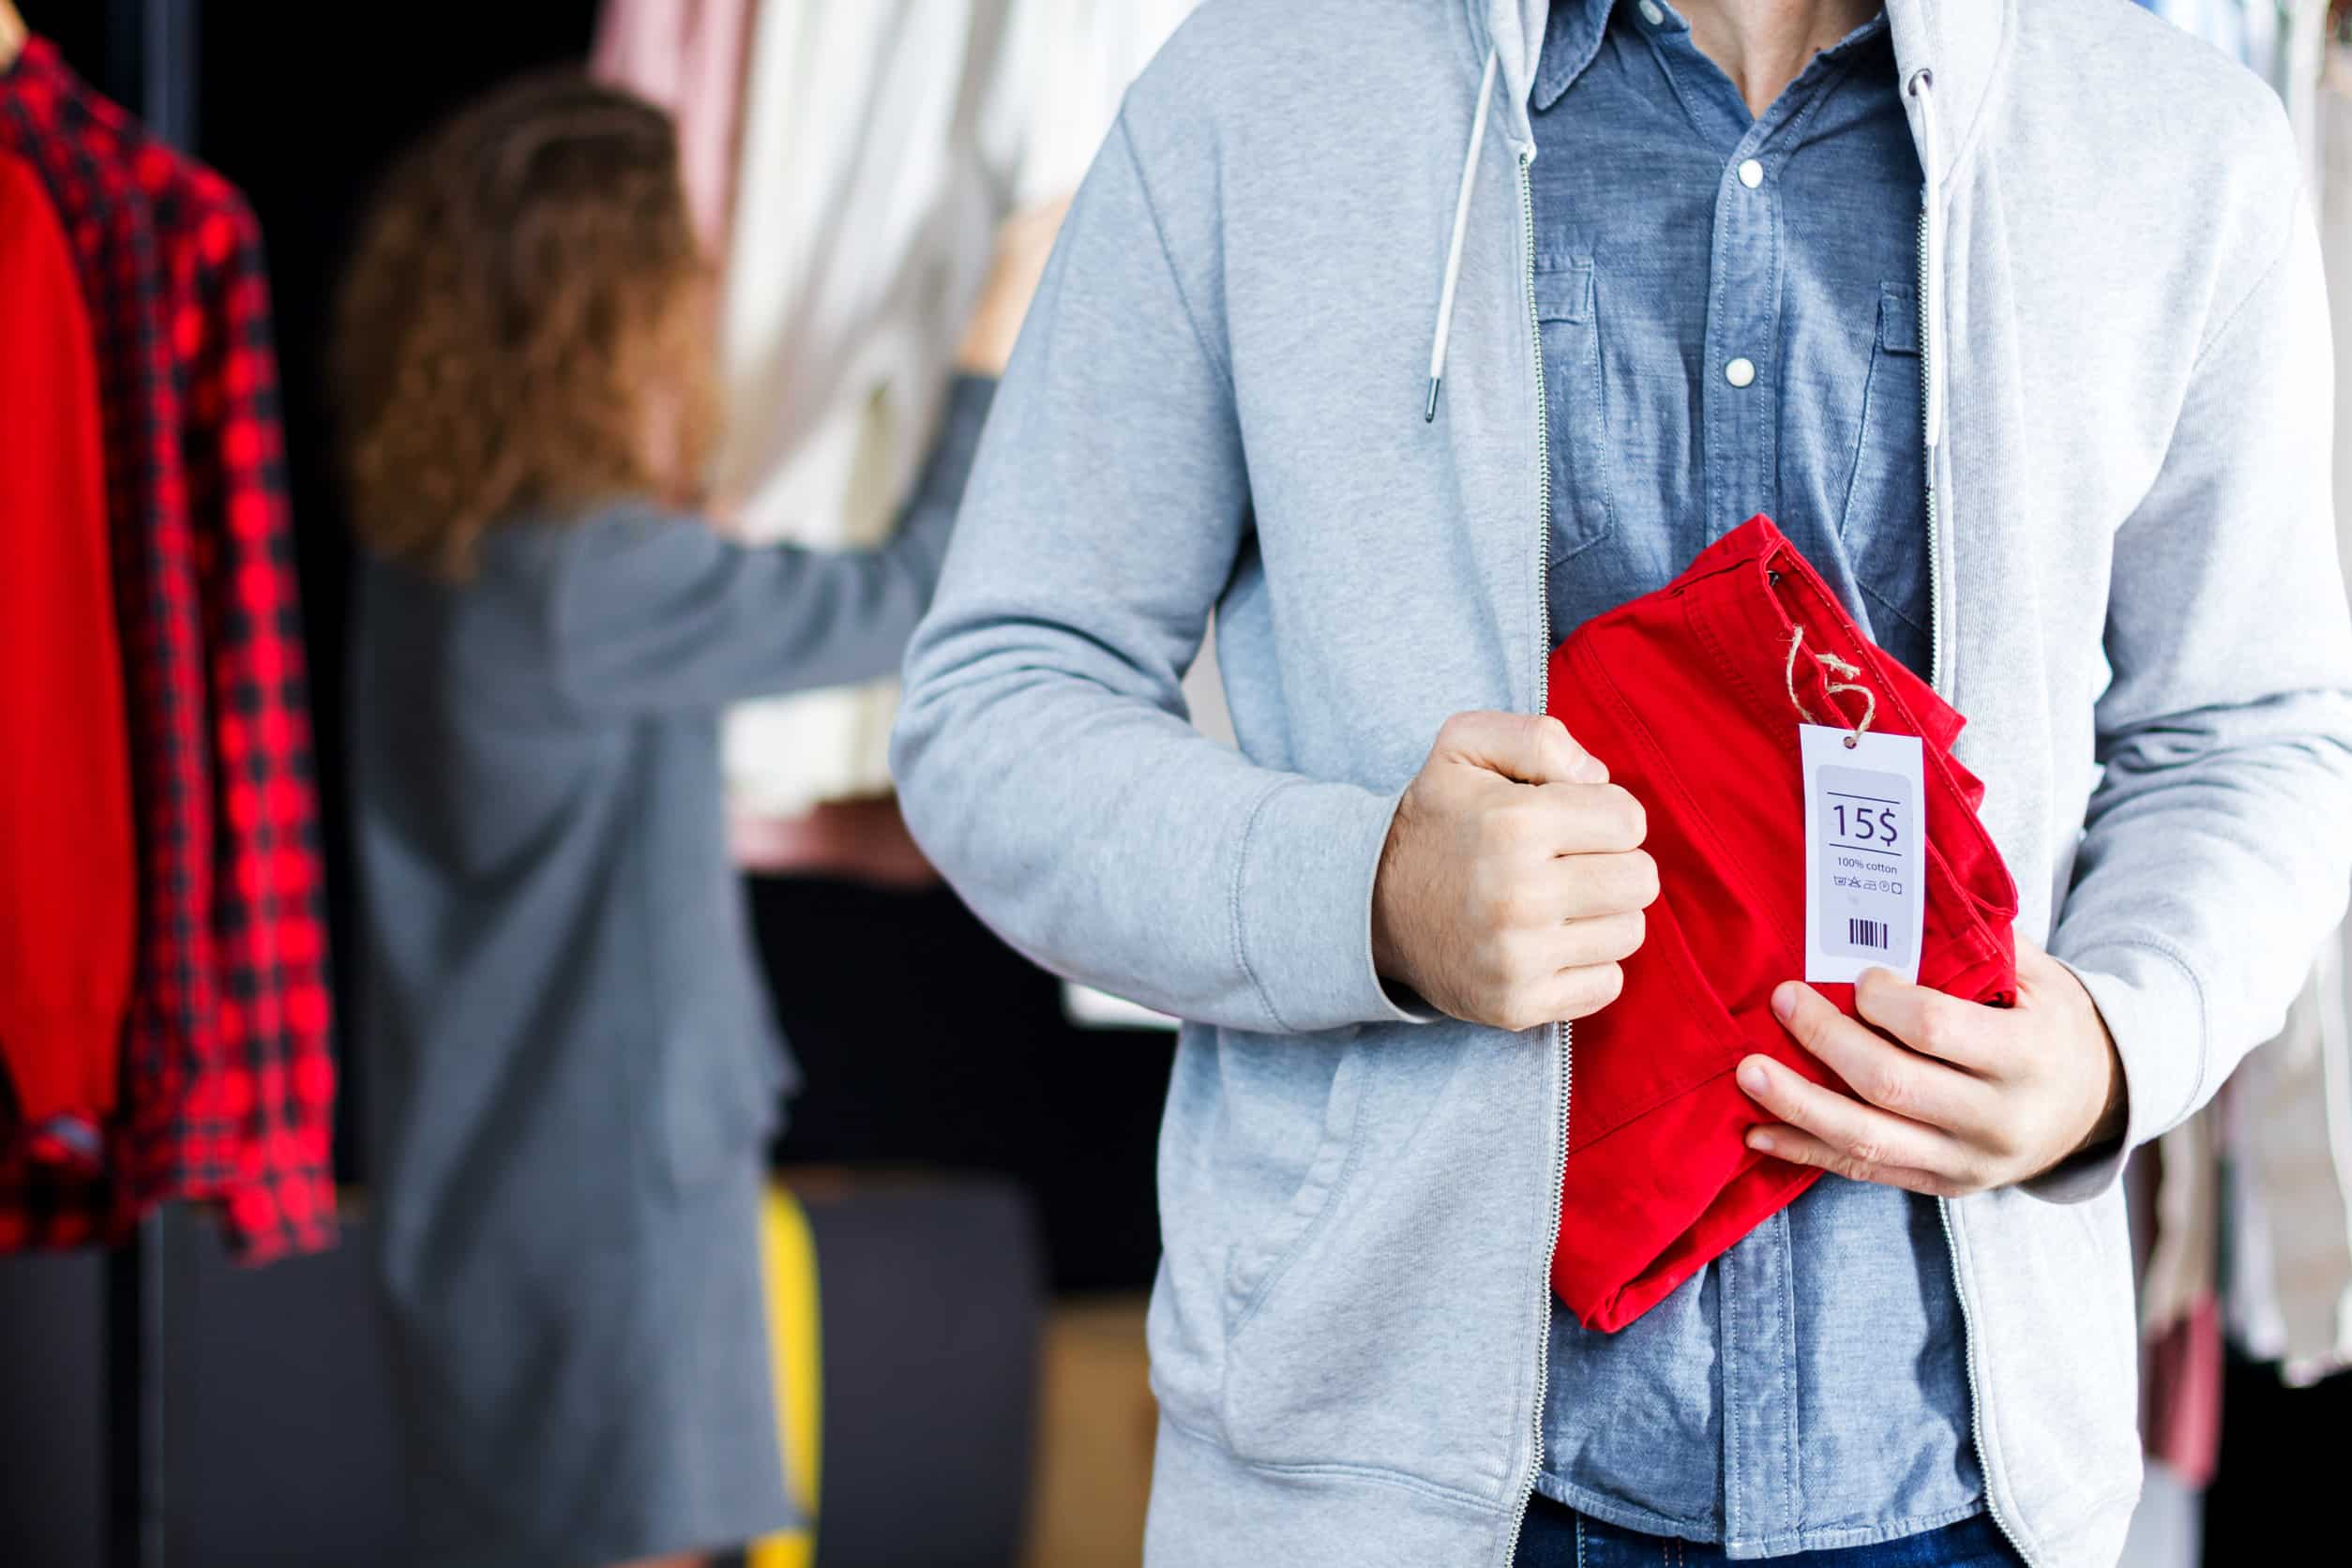 Were You Hit with IL Shoplifting Charges over the Holidays? Fight Back